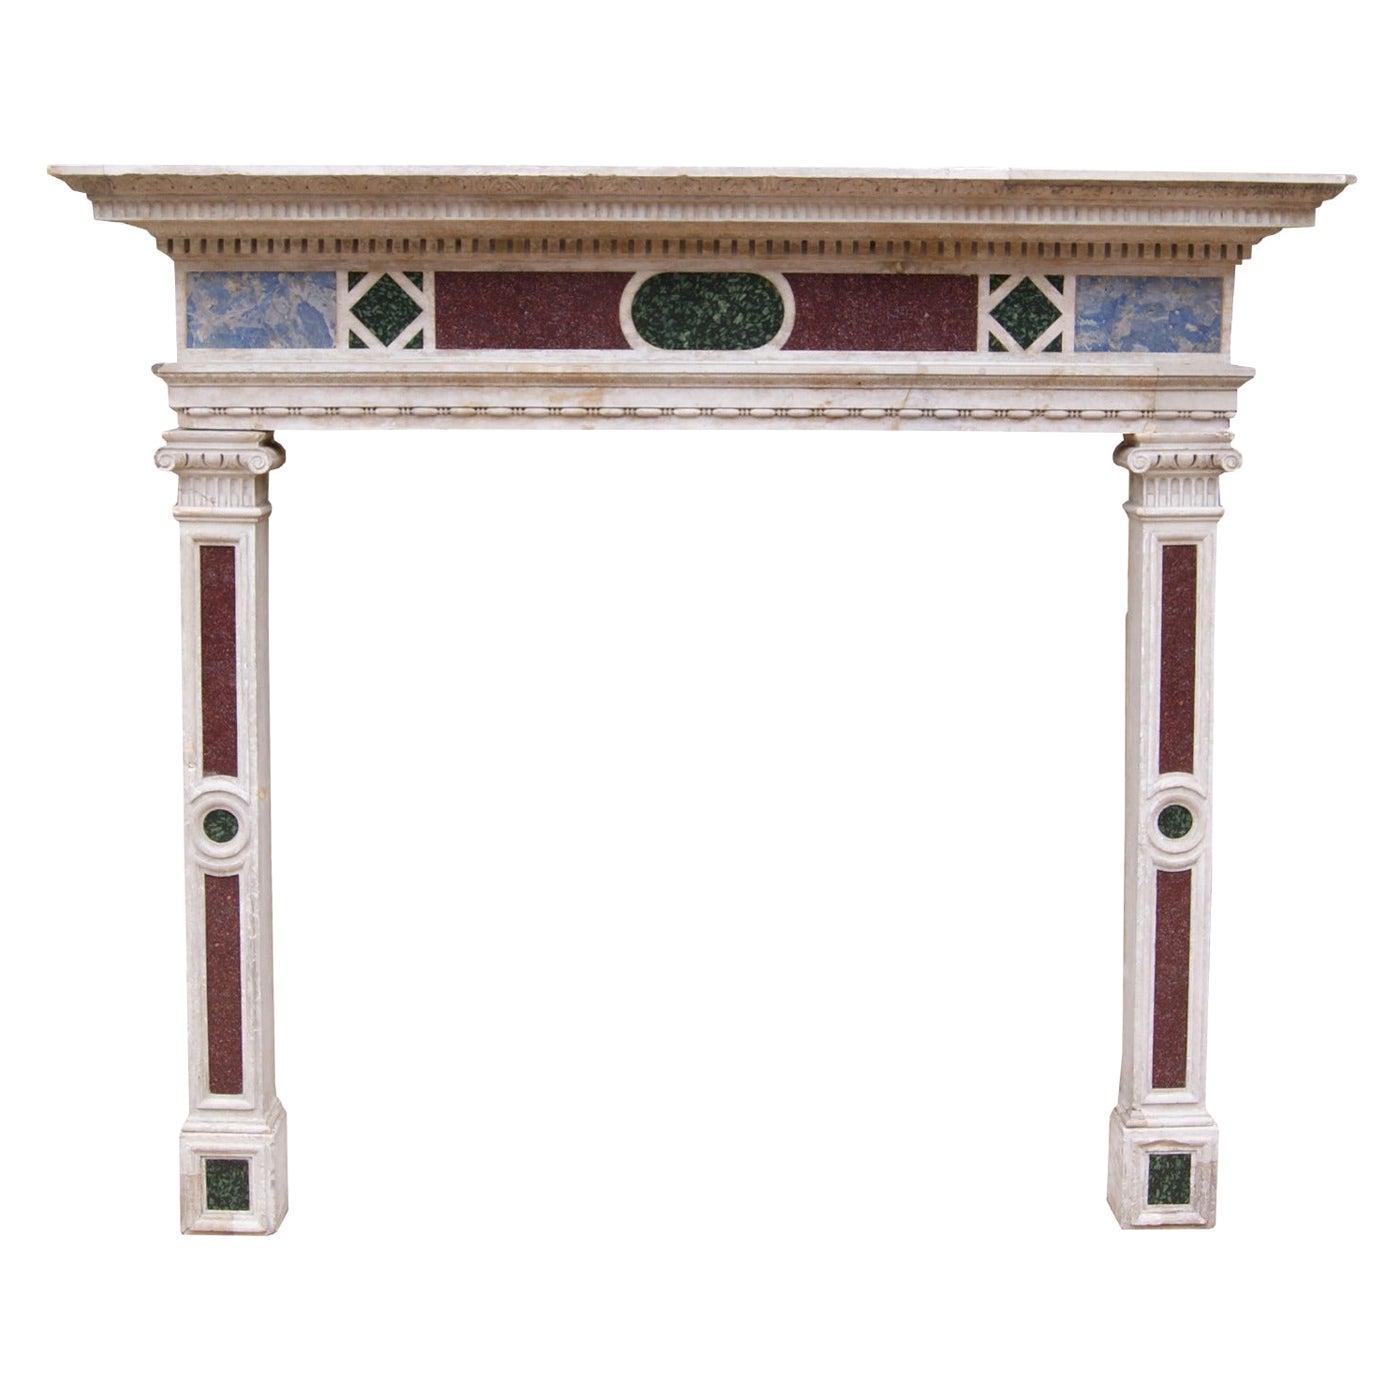 English Renaissance Revival Mantel with Porphyry Inlay For Sale